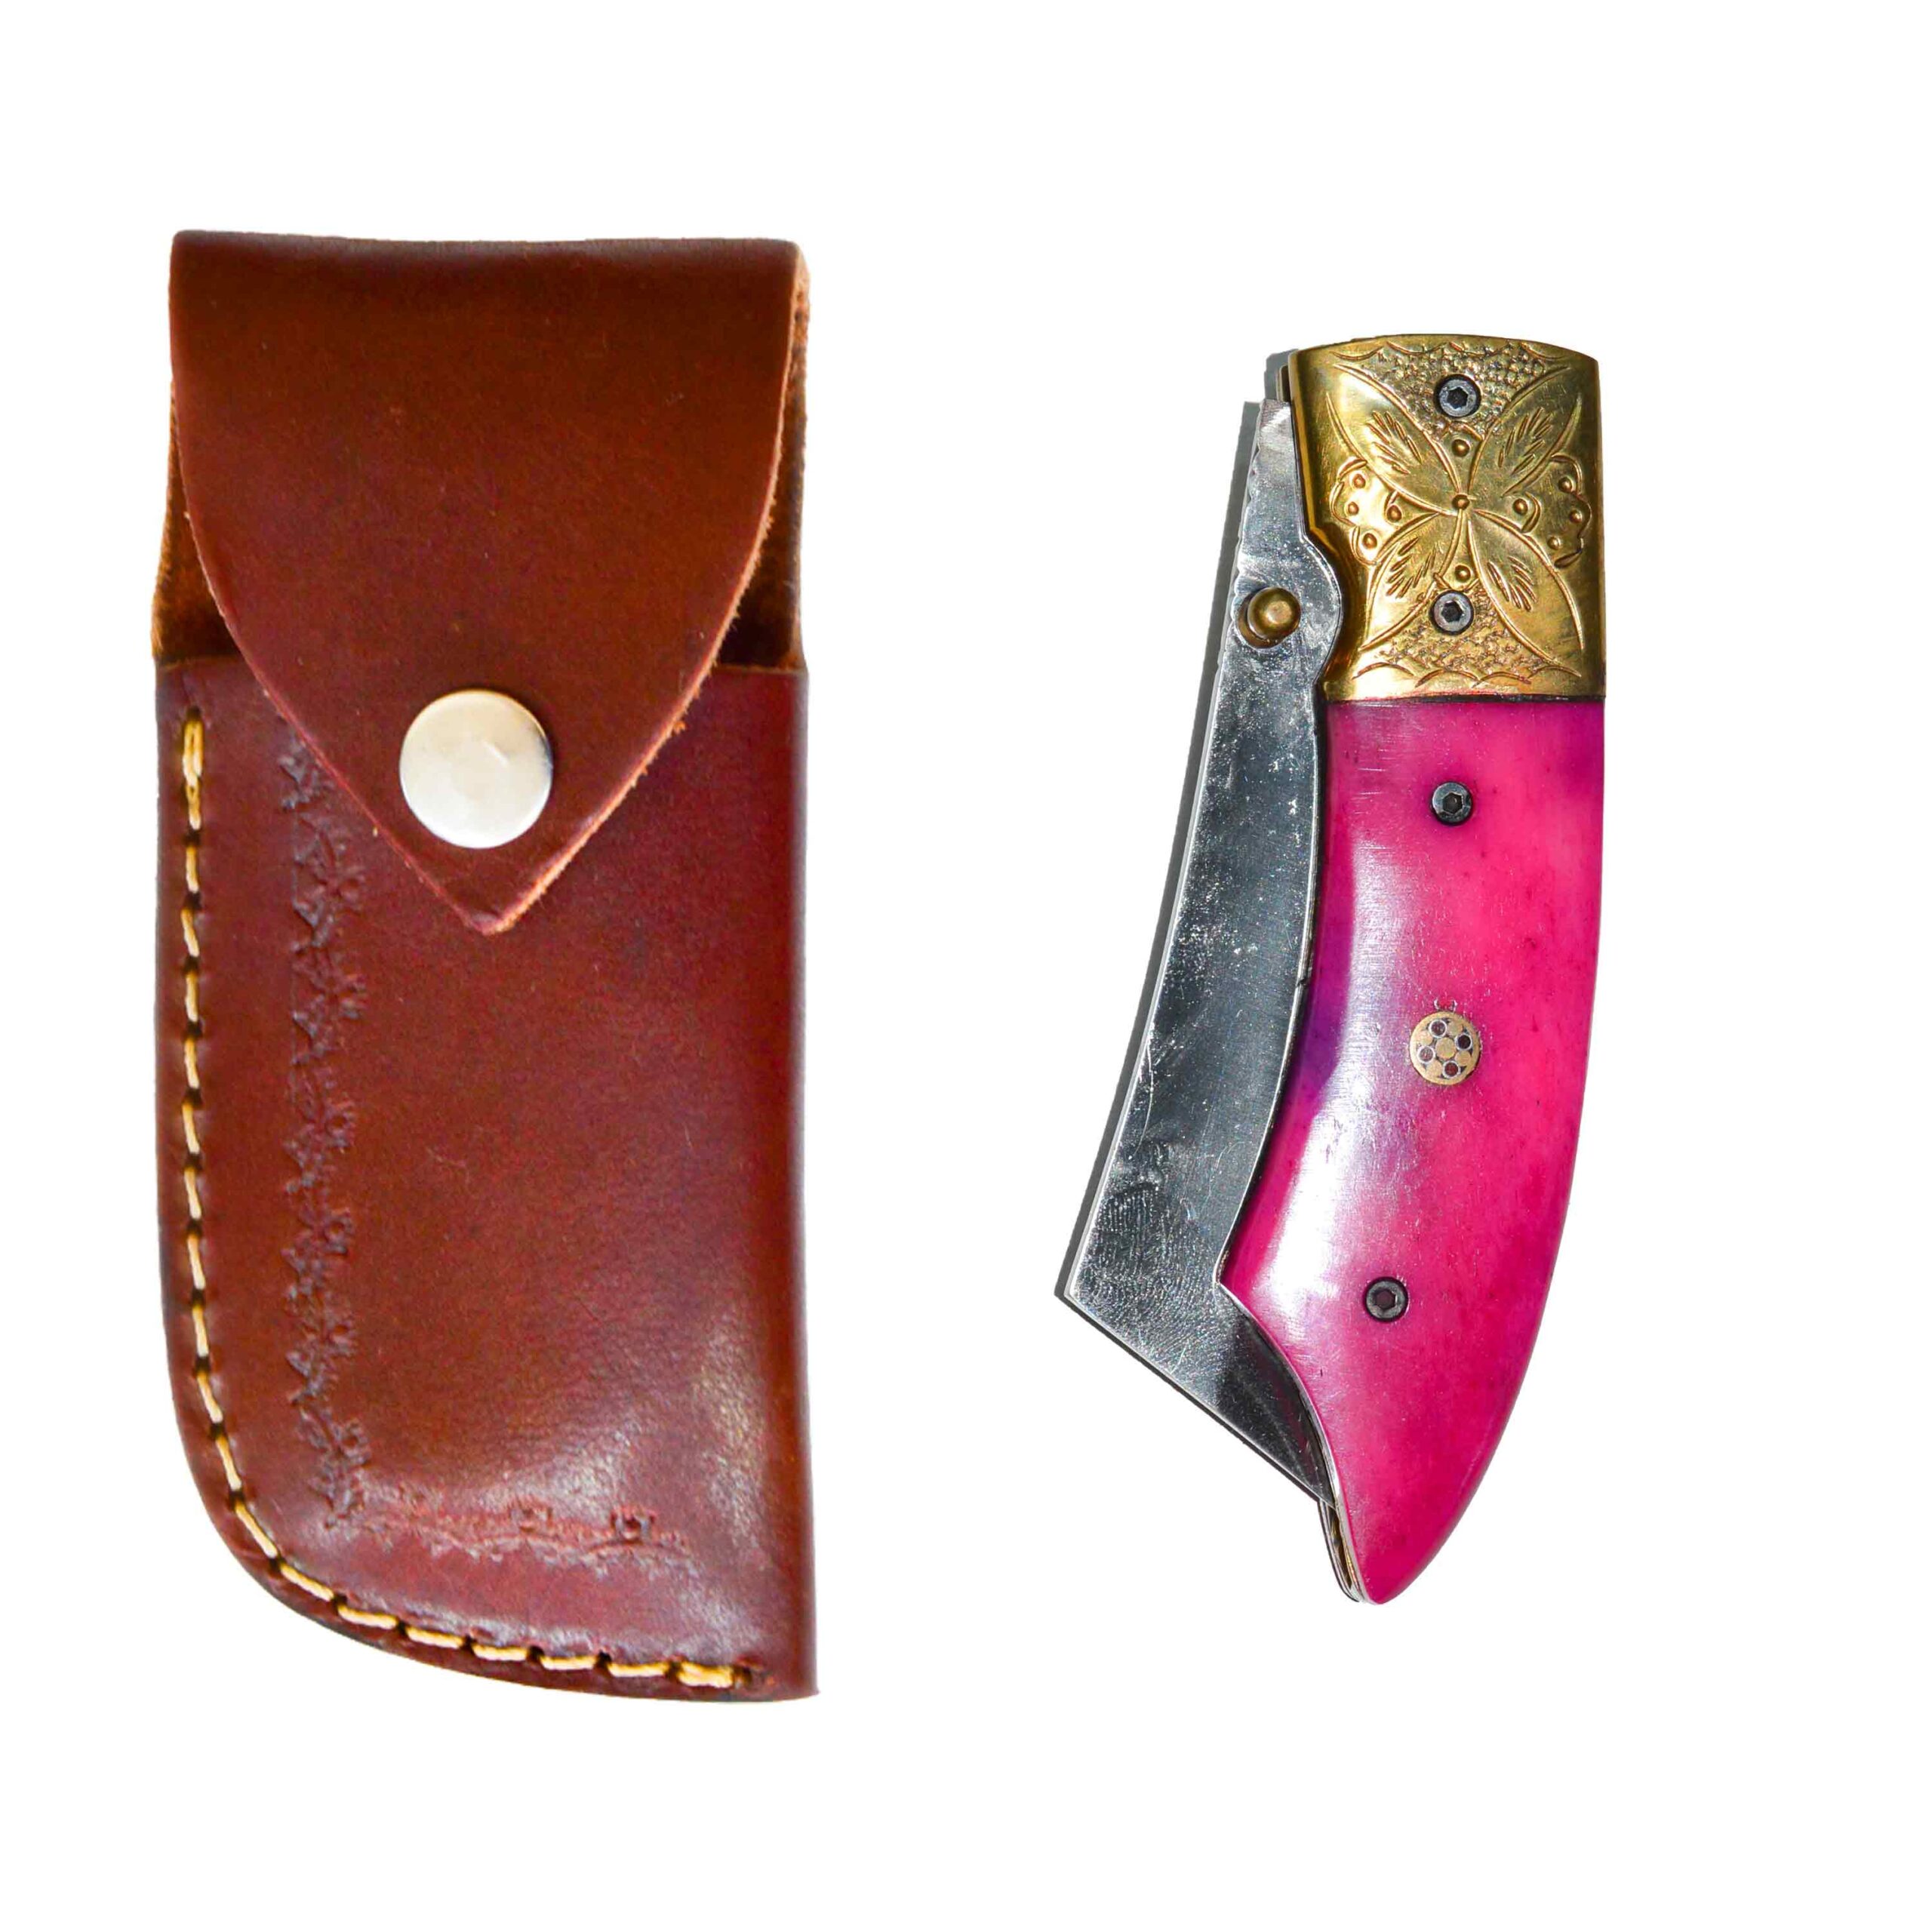 Damascus Steel folding Knife, Pink Handle with golden grip